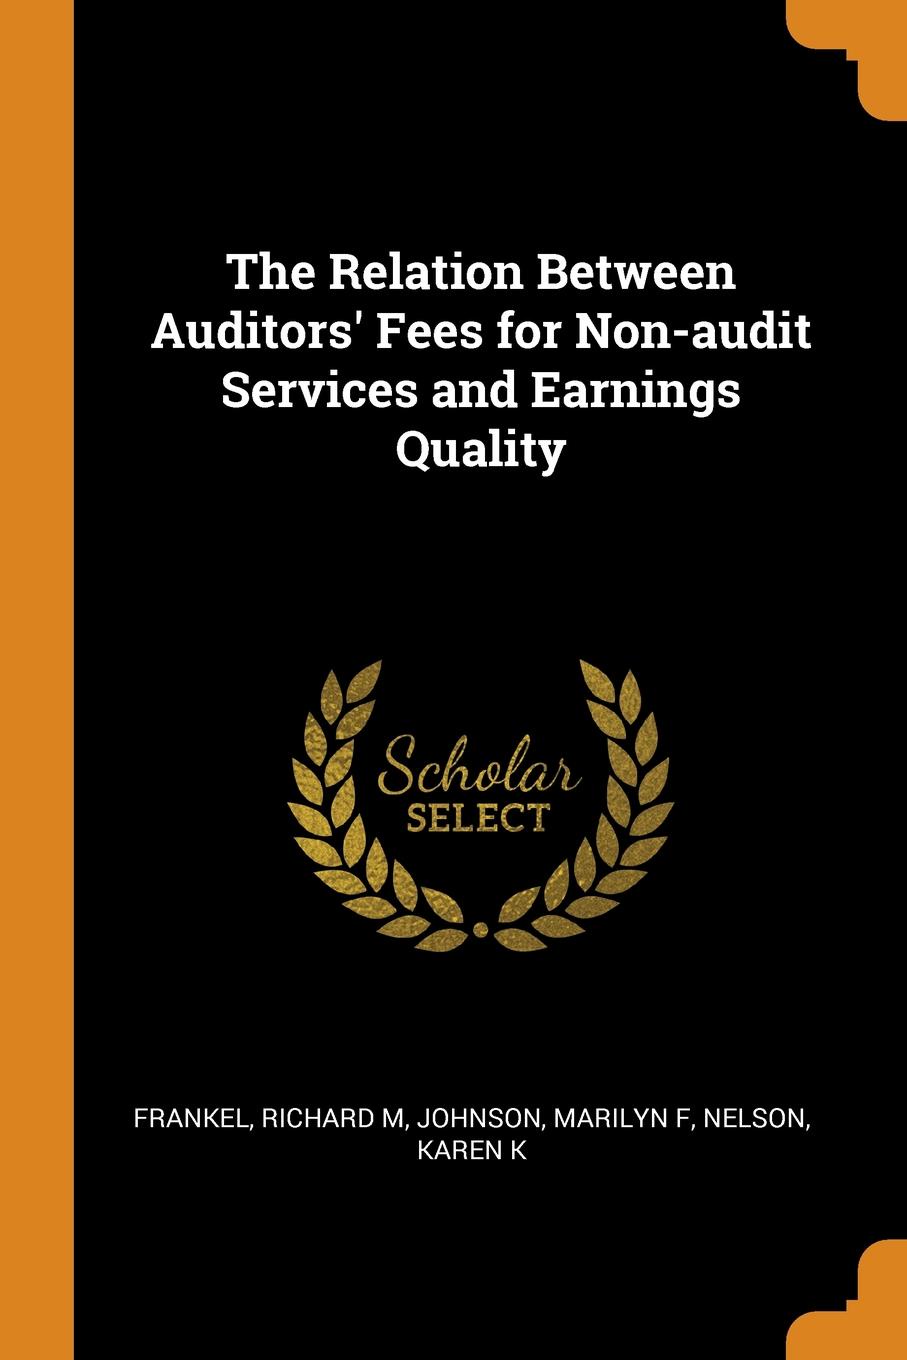 The Relation Between Auditors. Fees for Non-audit Services and Earnings Quality